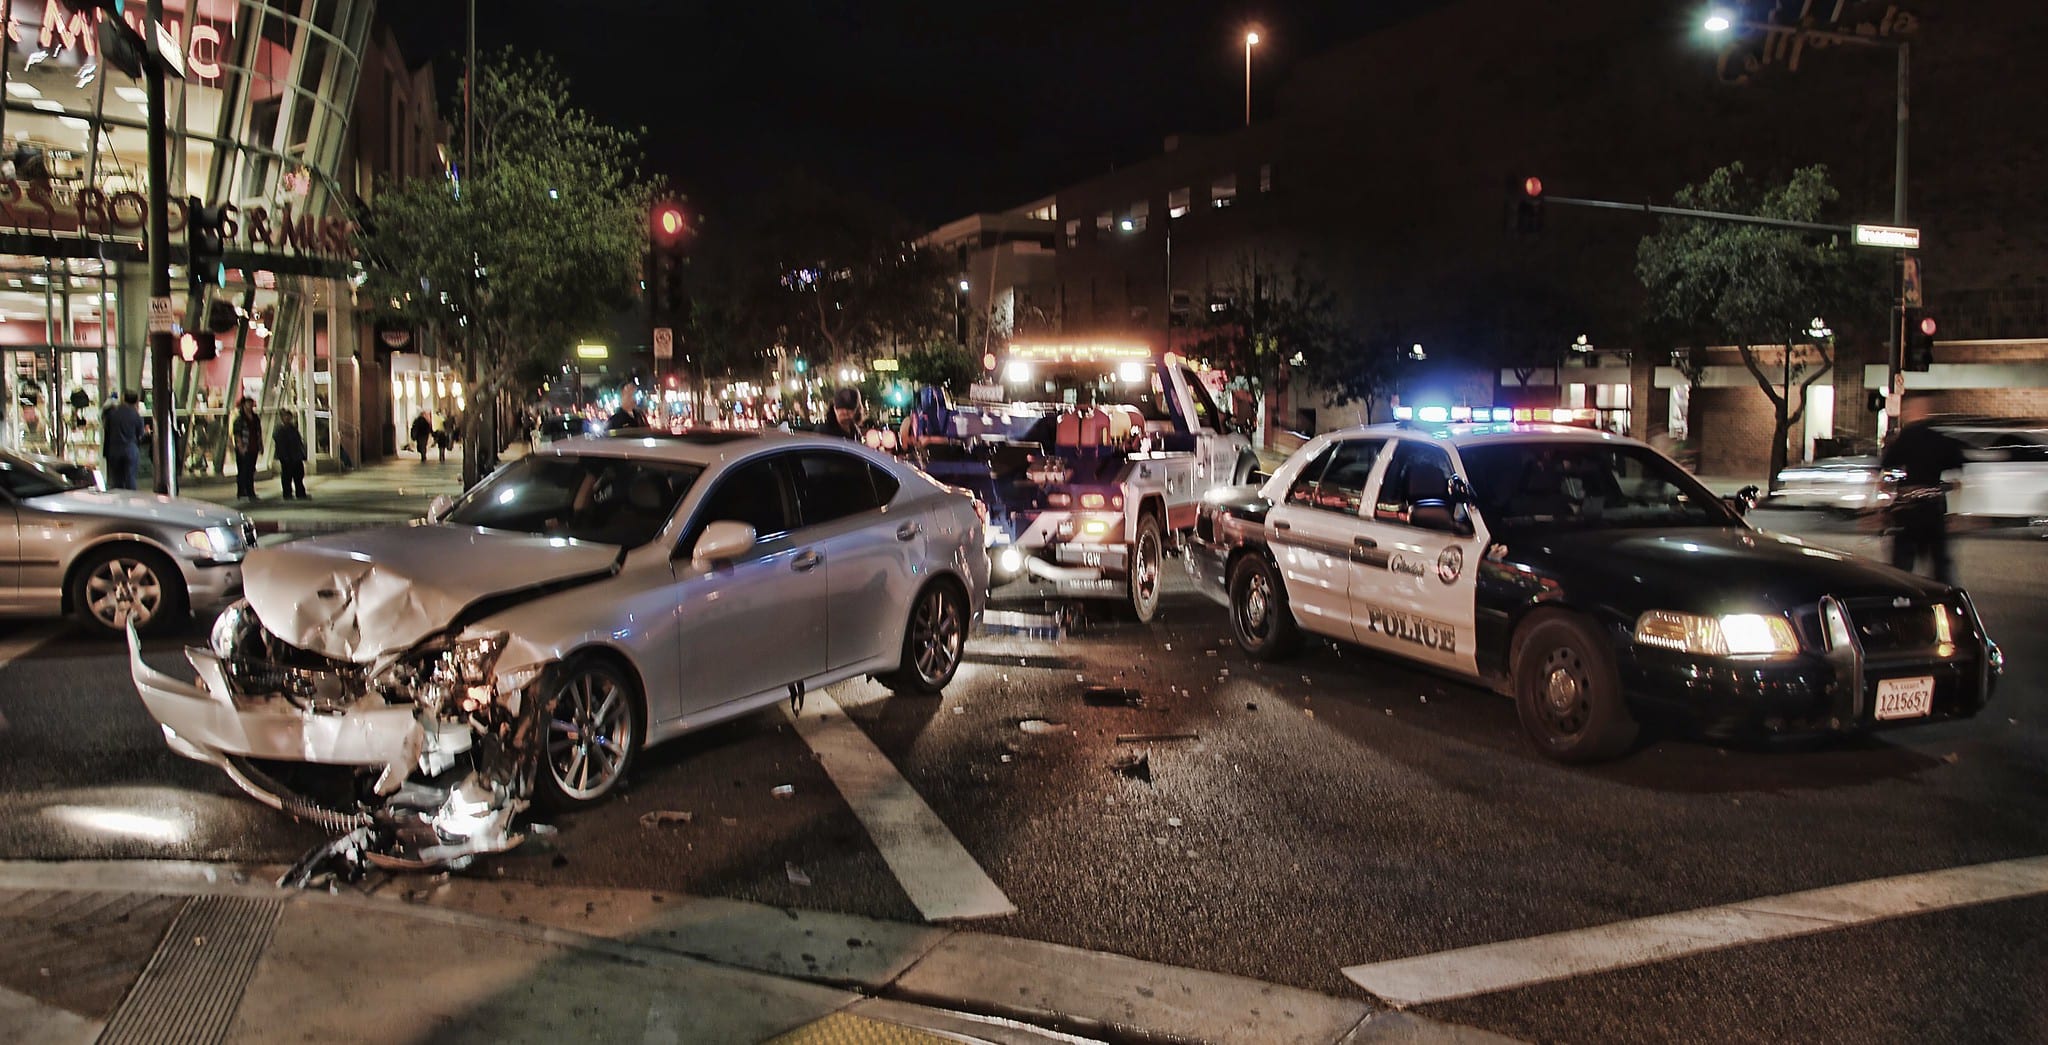 Tow truck picking up silver car after head-on collision, police car off to the side; image by Chris Yarzab, via Flickr, CC BY 2.0, no changes.